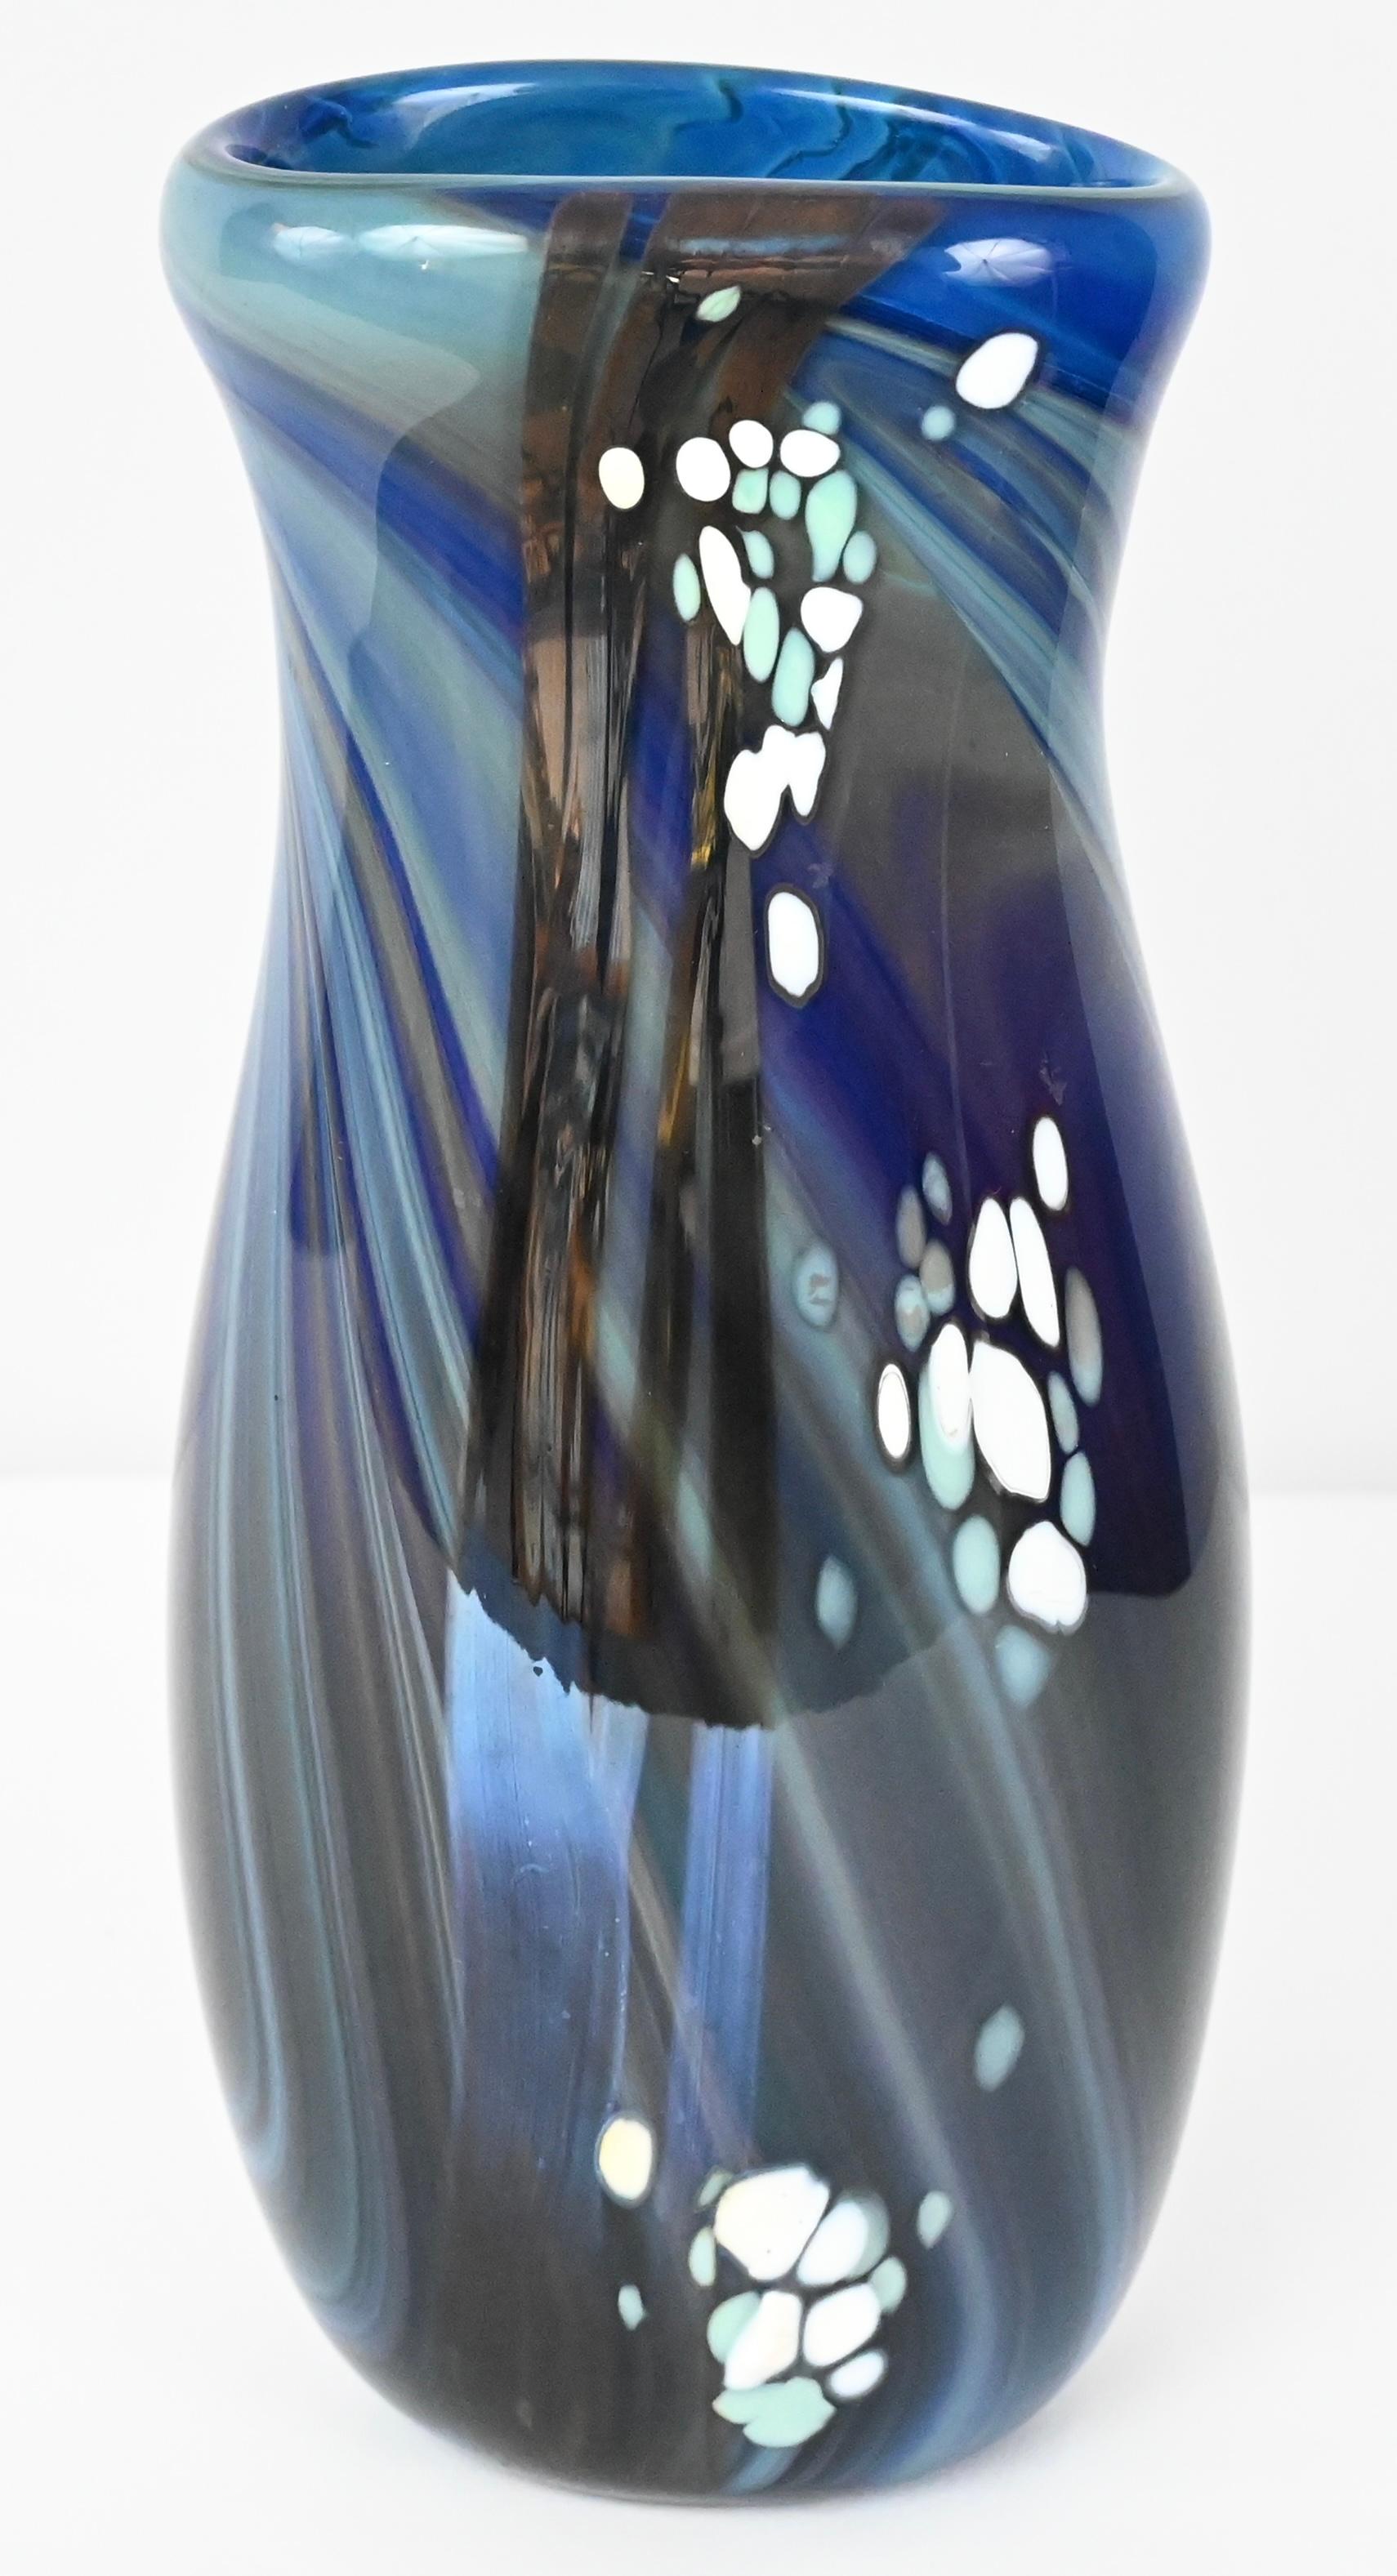 A very nice quality mid-20th Century art glass flower vase. This lovely hand blown Murano art glass vase is marked Swispot and dated. Hand-blown using Murano art glass, speckled, natural pattern of irregular sized white spots on variations of cobalt